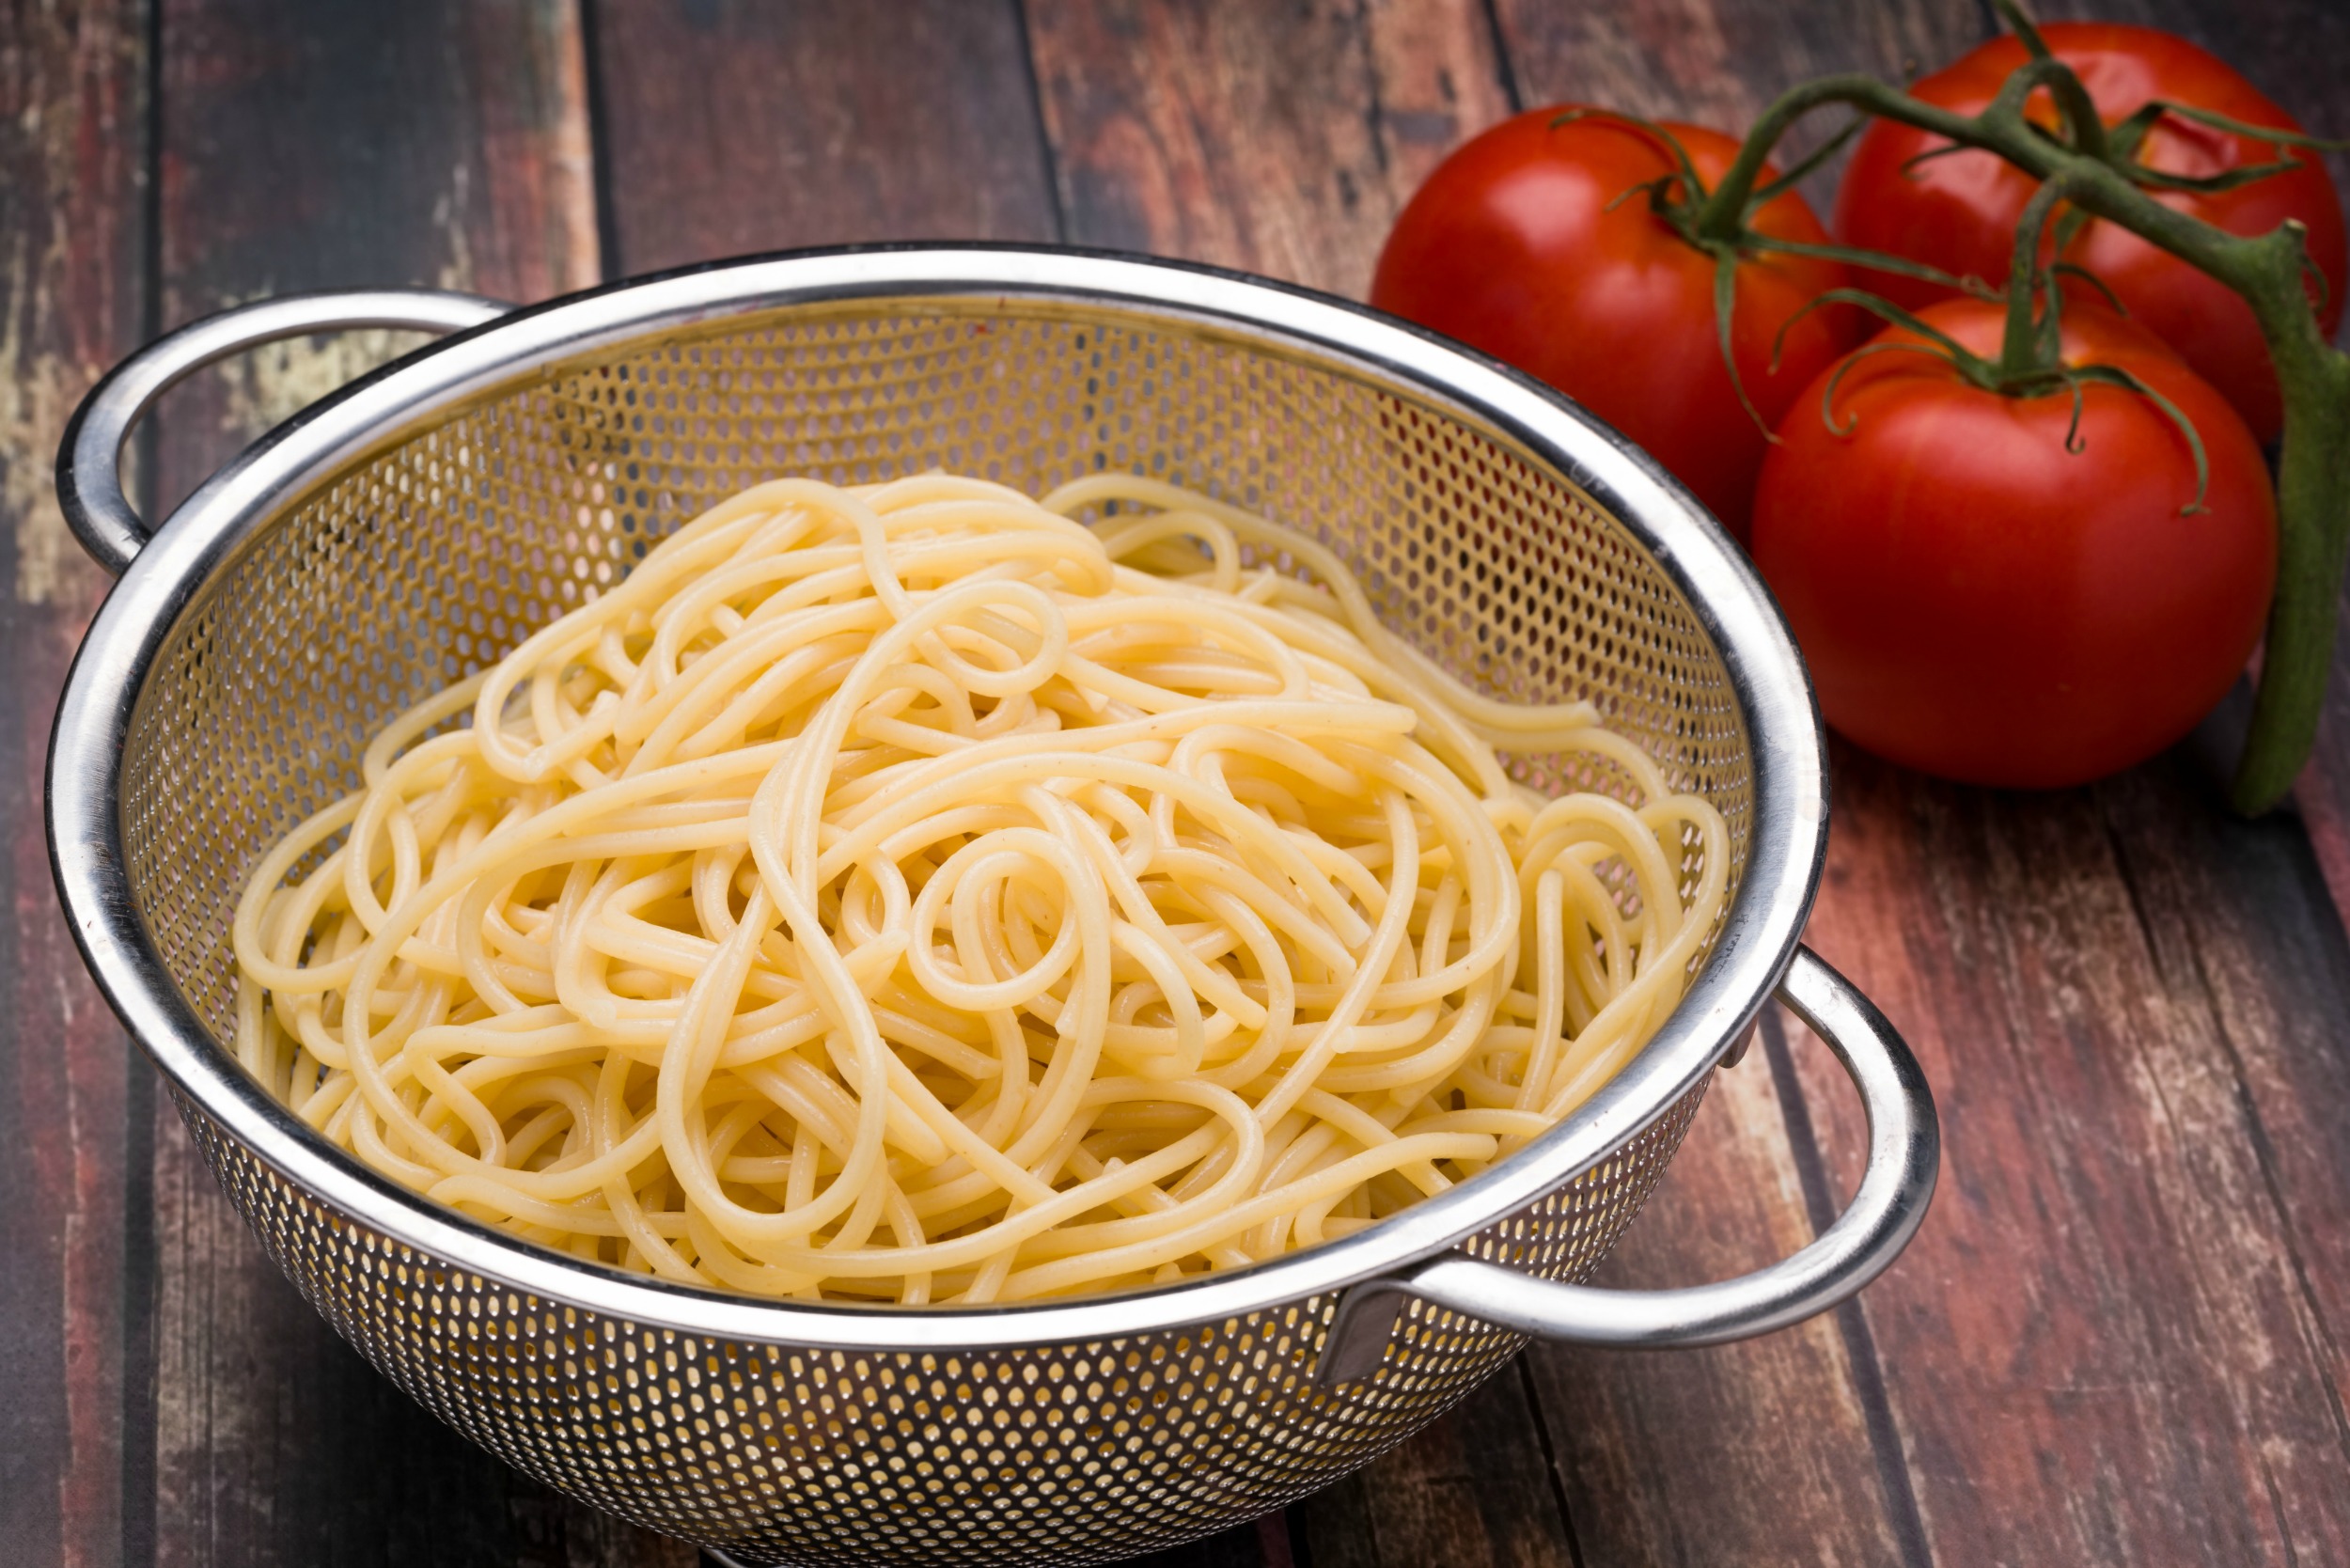 10 Mistakes Everyone Makes When Cooking Pasta